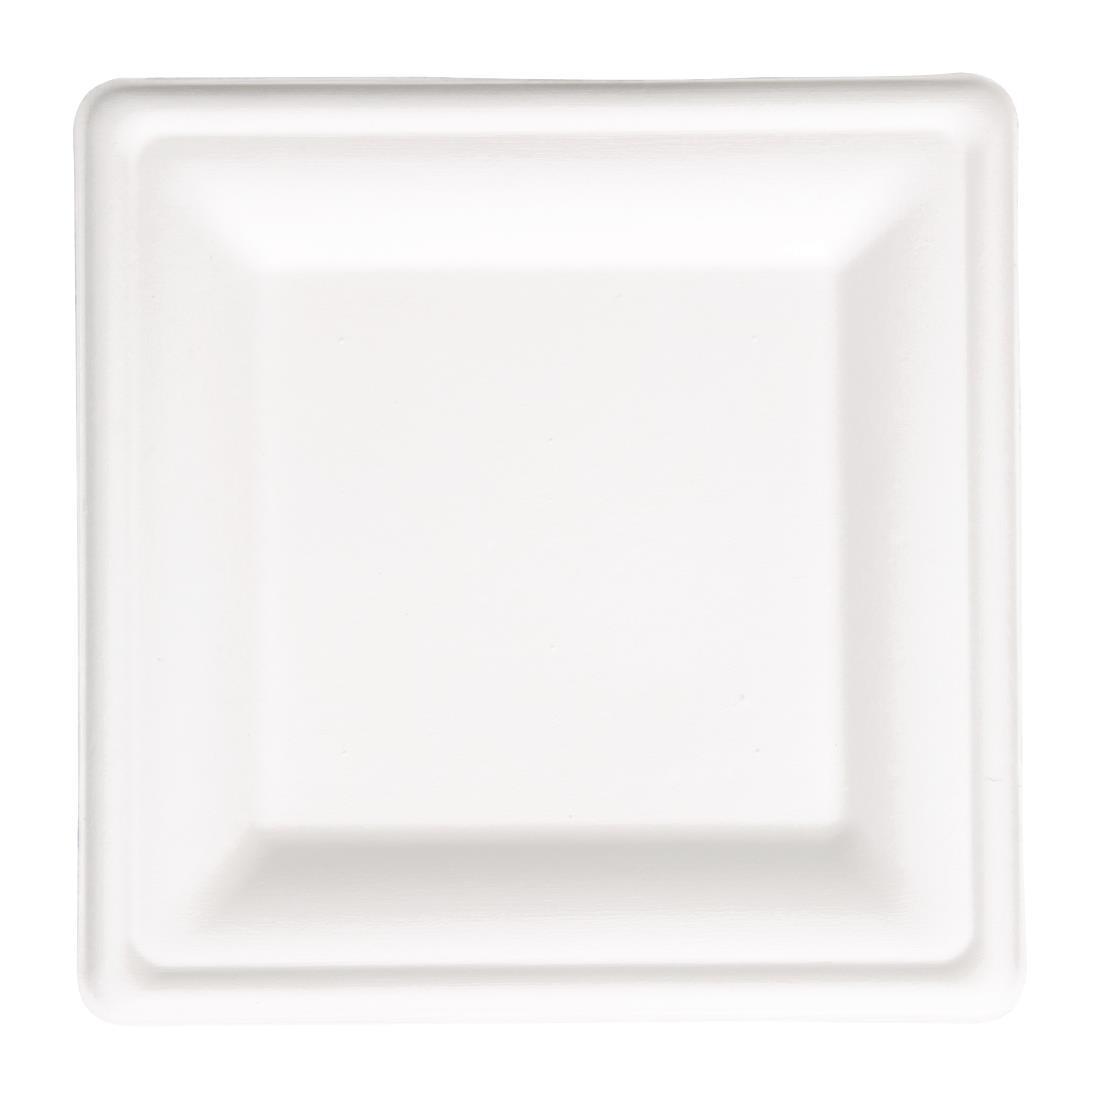 Fiesta Compostable Bagasse Square Plates 204mm (Pack of 50) - FC519  - 3